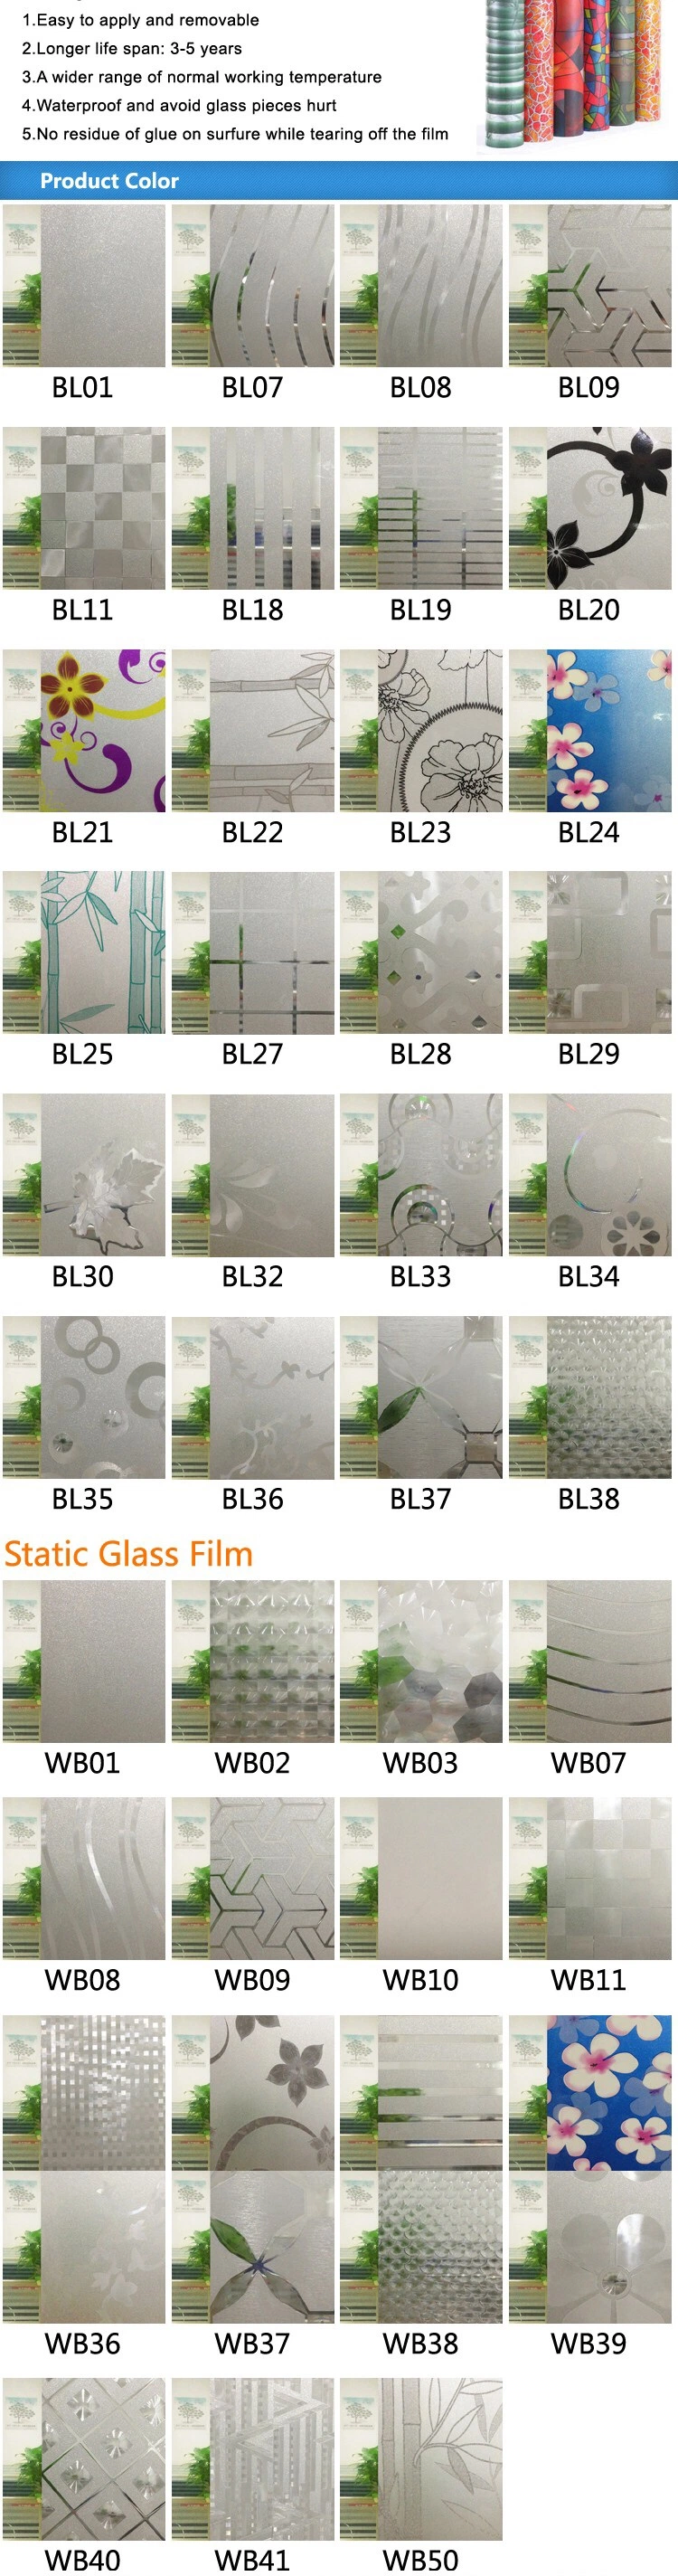 Pet Architectural Film Decorative Window Film Covering with High UV Protection and Heat Resistant Photochromic Smart Window Tint